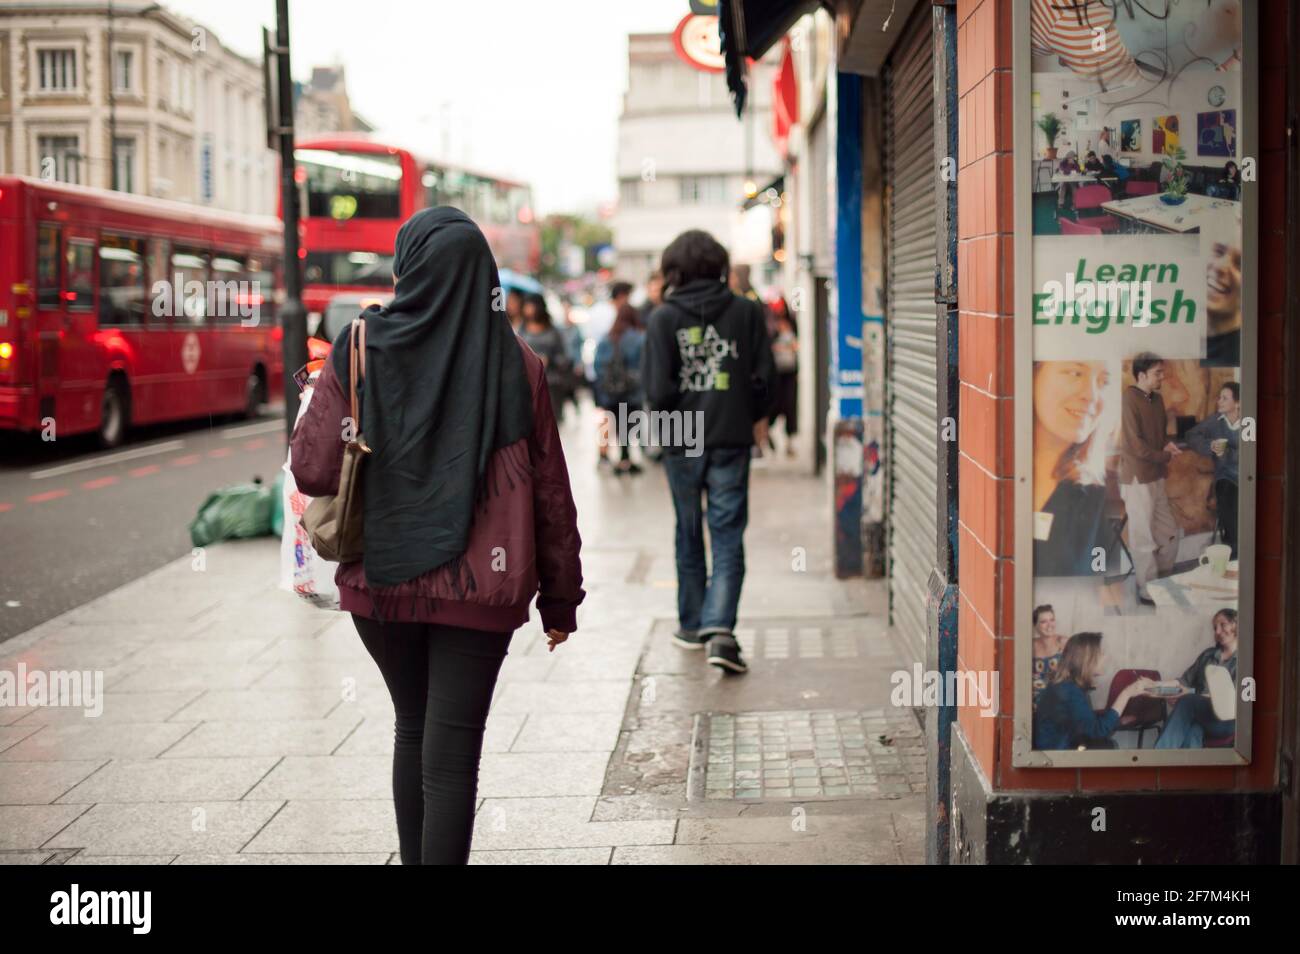 Rear view of muslim woman in hijab passing by a 'Learn English' advert. Camden High Street, London, UK. Aug 2015 Stock Photo